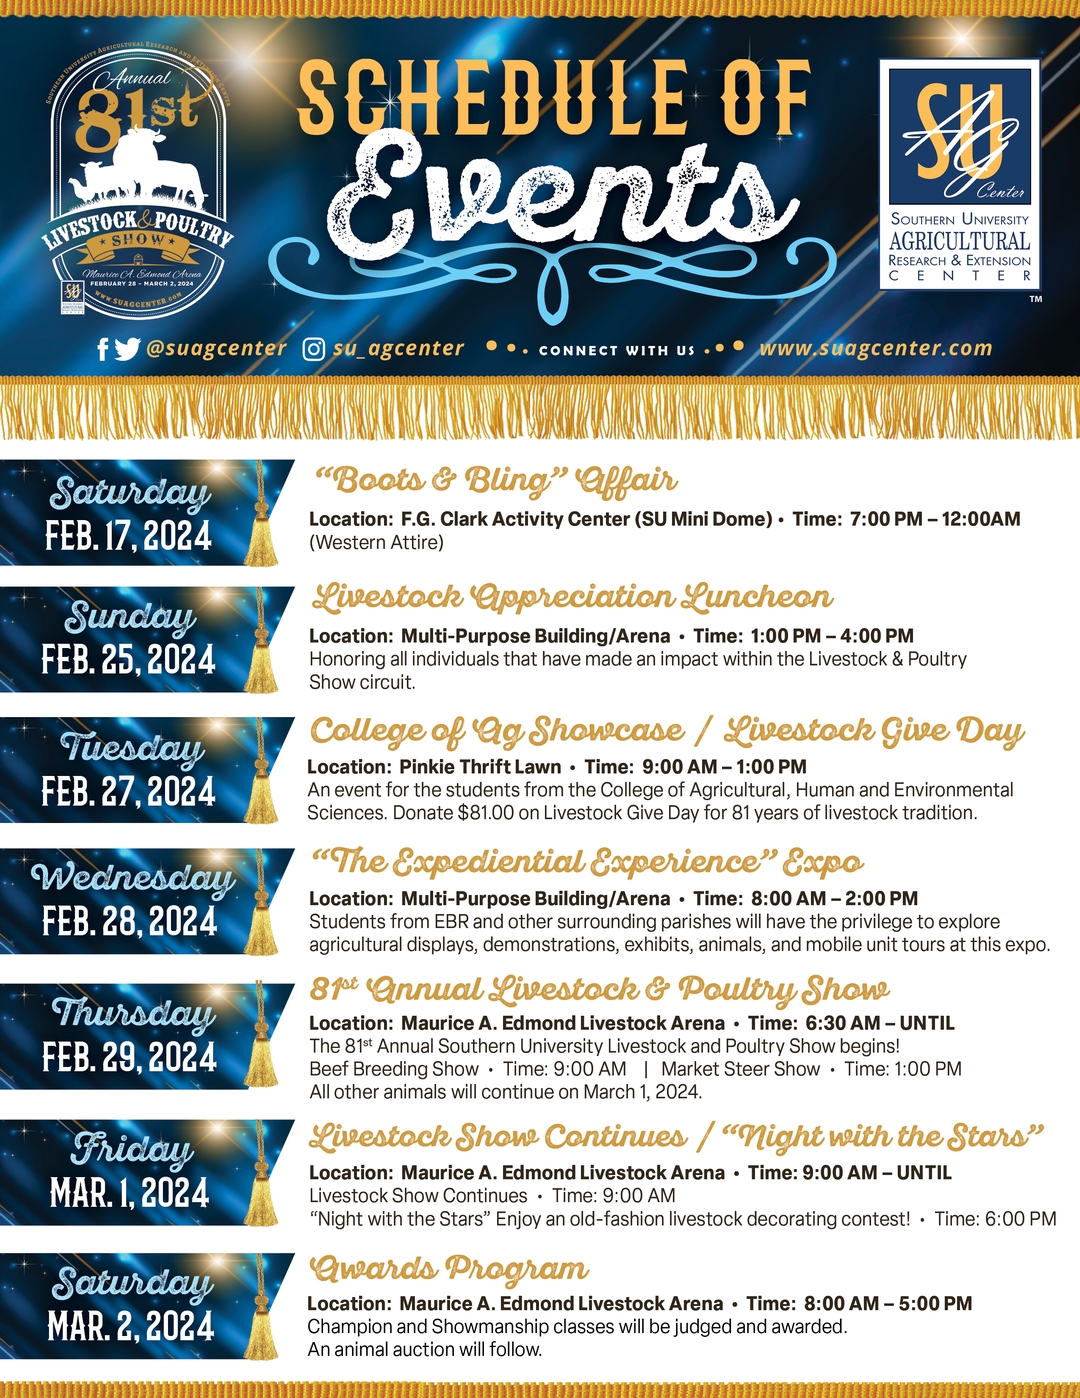 Southern University Ag Center's 81st Annual Livestock Show Schedule of Events